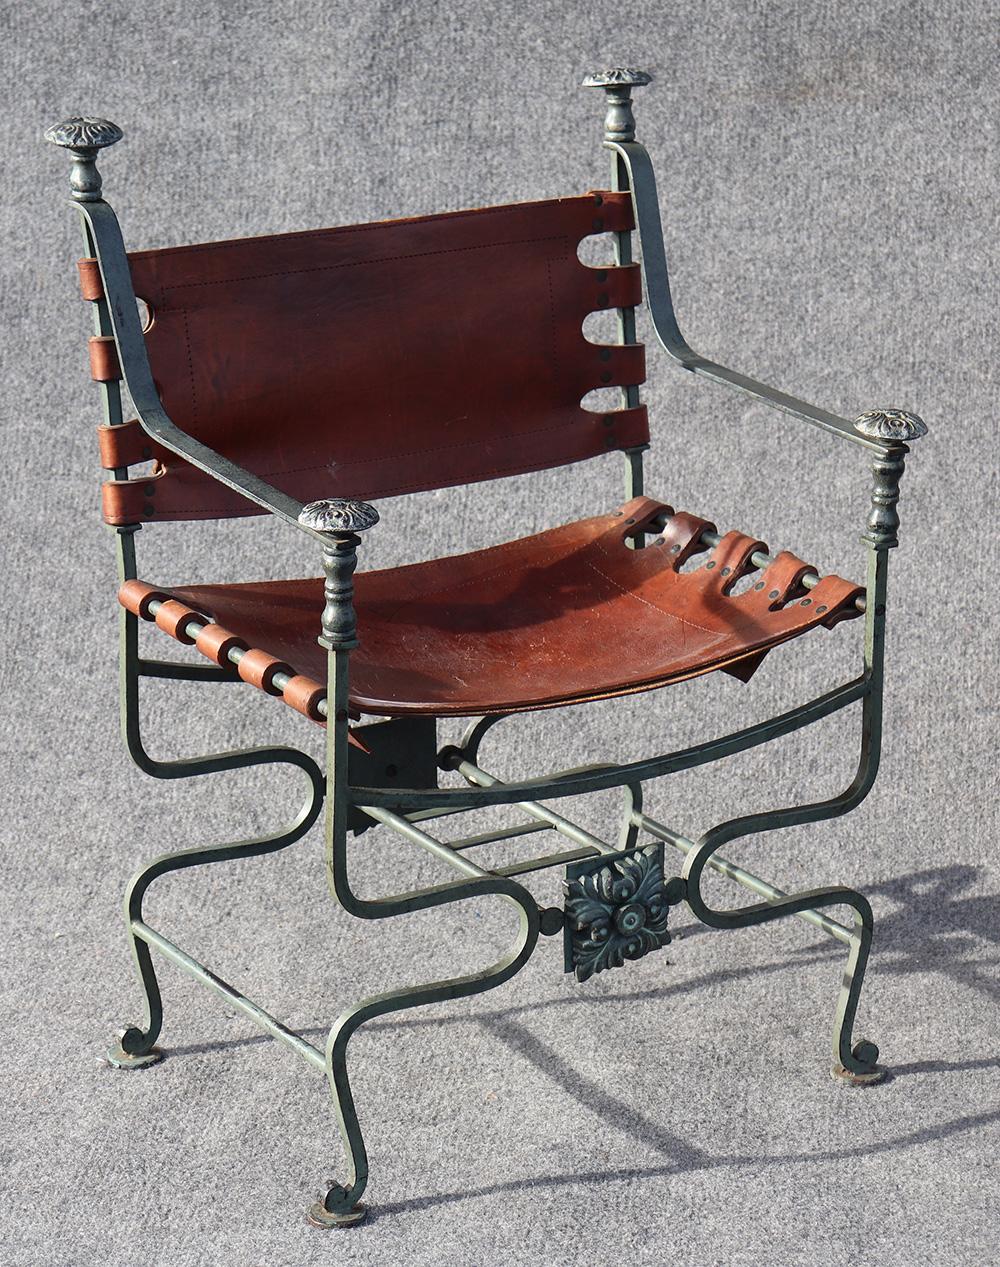 Pair of rare, incredibly sturdy, Italian leather upholstered chairs with iron and bronze details.